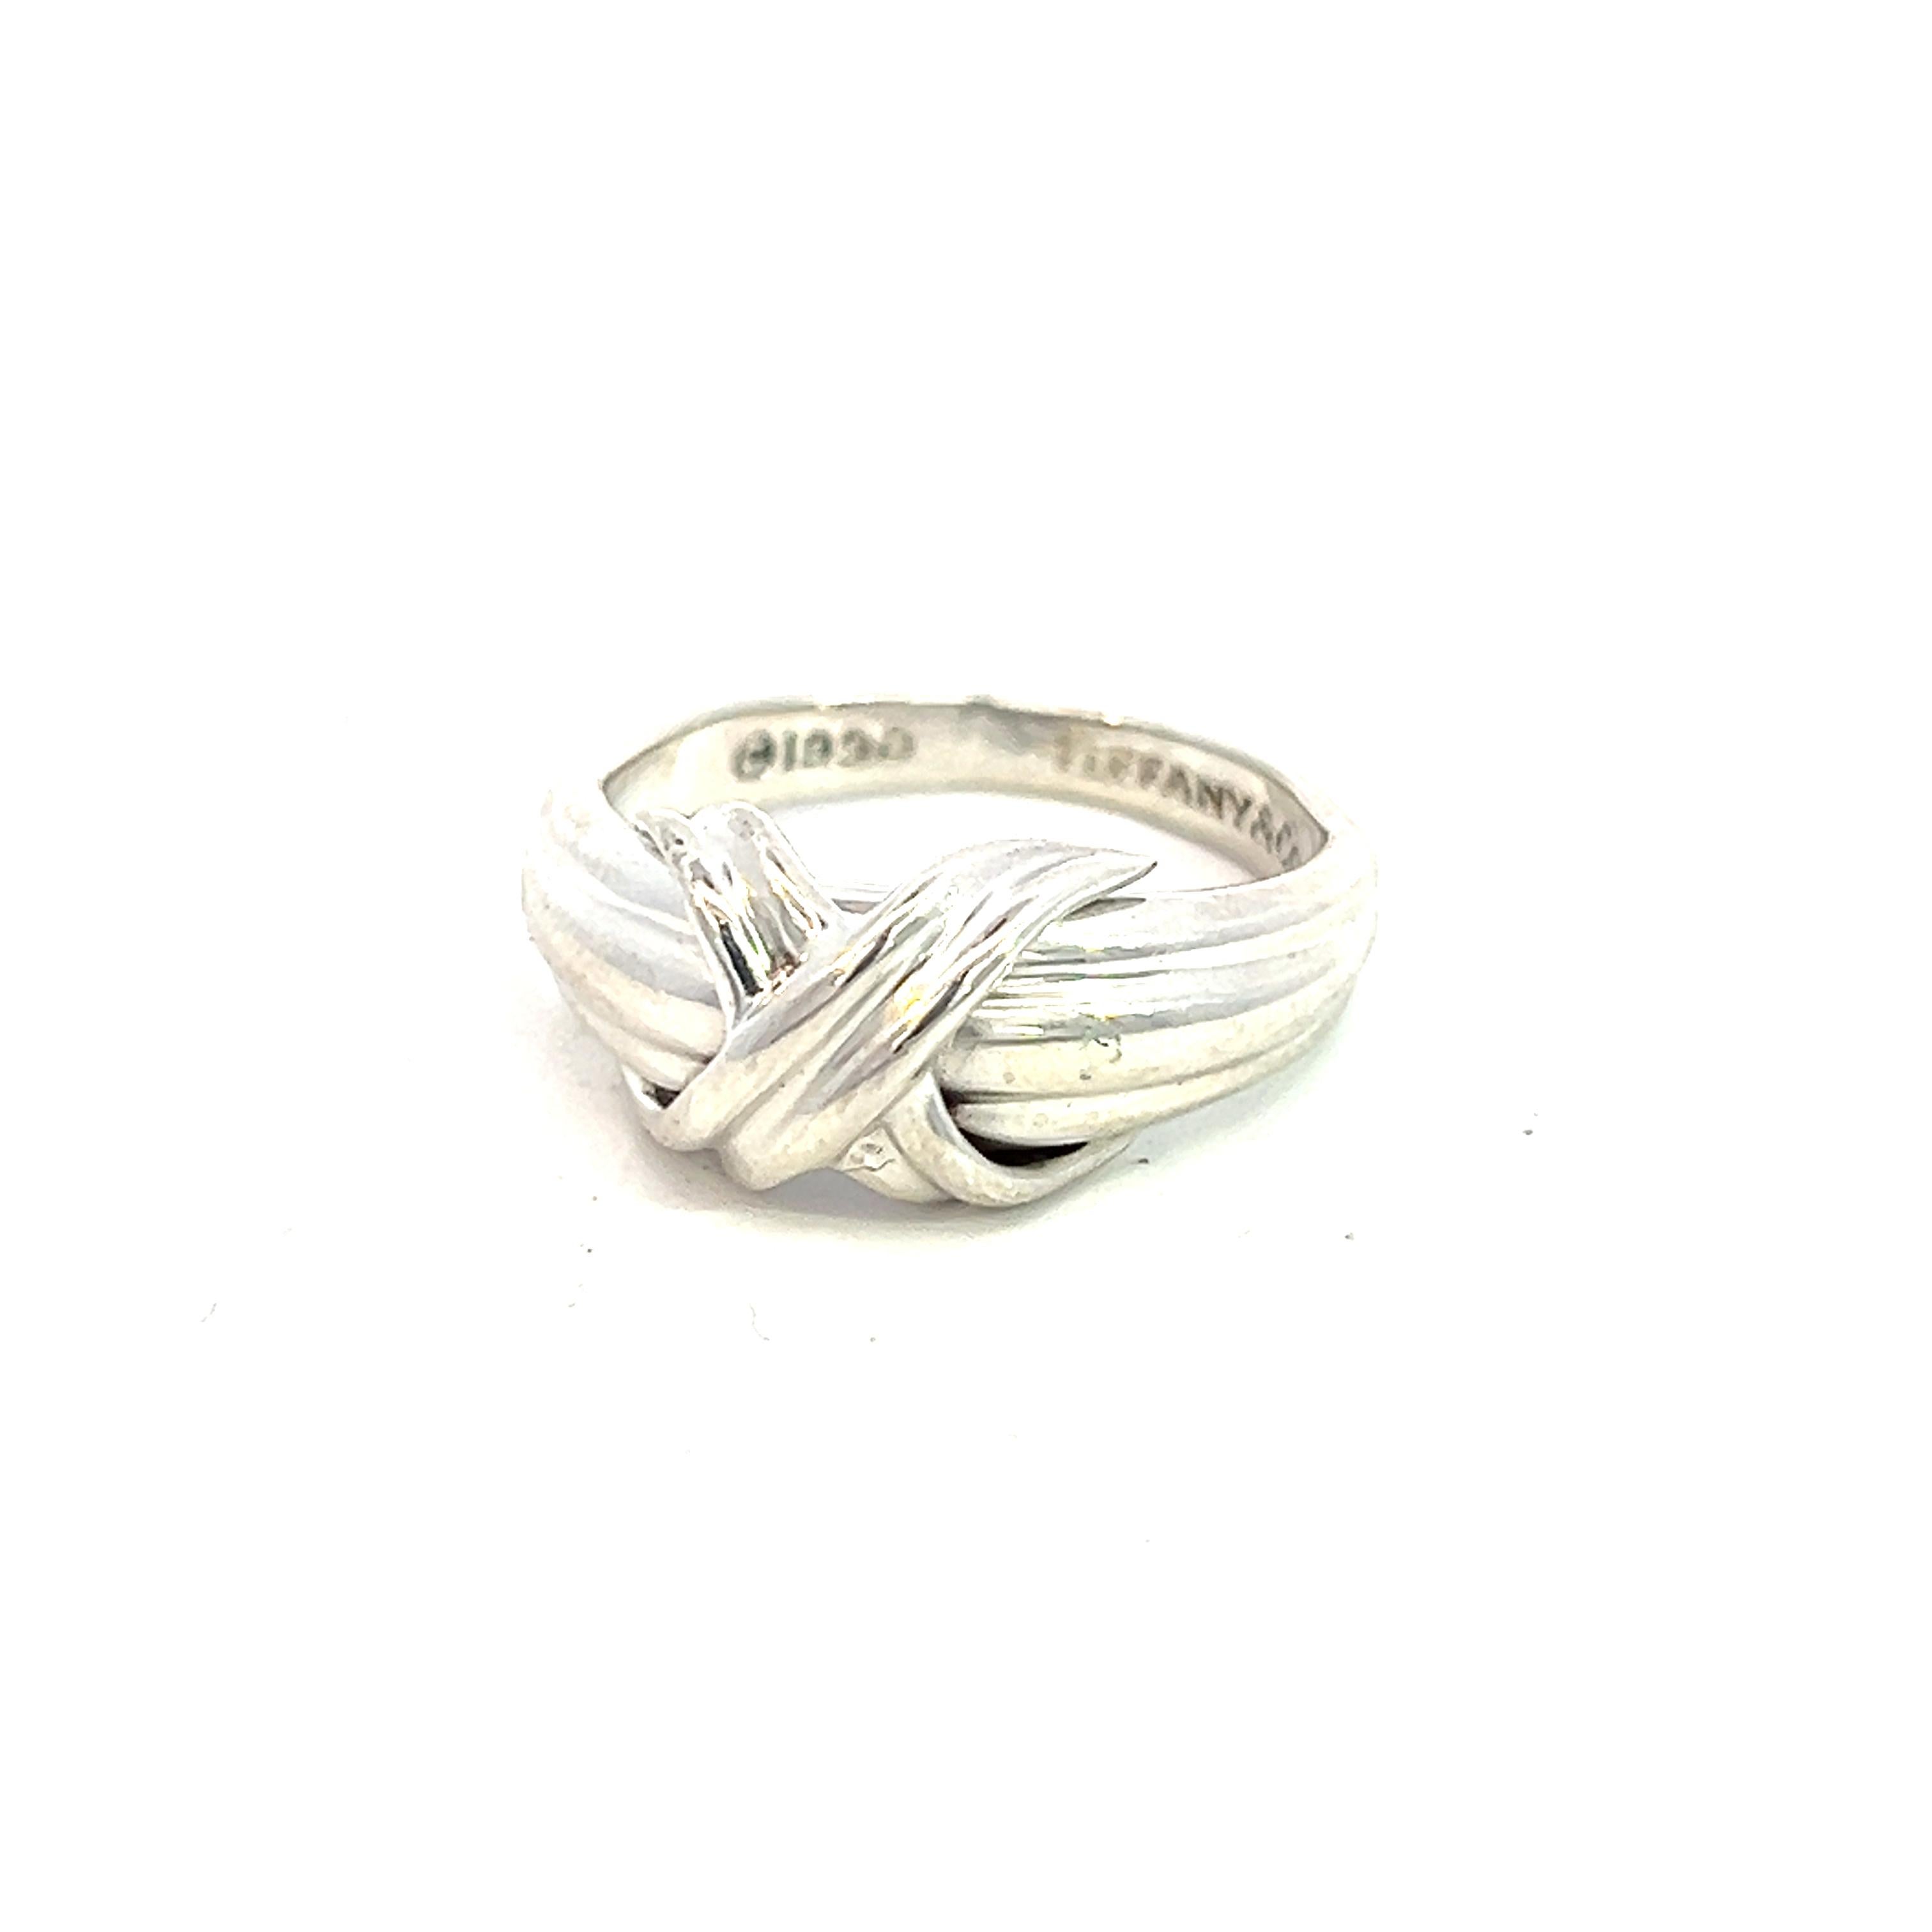 Authentic Tiffany & Co Estate X Signature Ring 7 Sterling Silver TIF648

TRUSTED SELLER SINCE 2002

DETAILS
Style: X Signature
Ring Size: 7
Metal: Sterling Silver

We try to present our estate items as best as possible and most have been newly